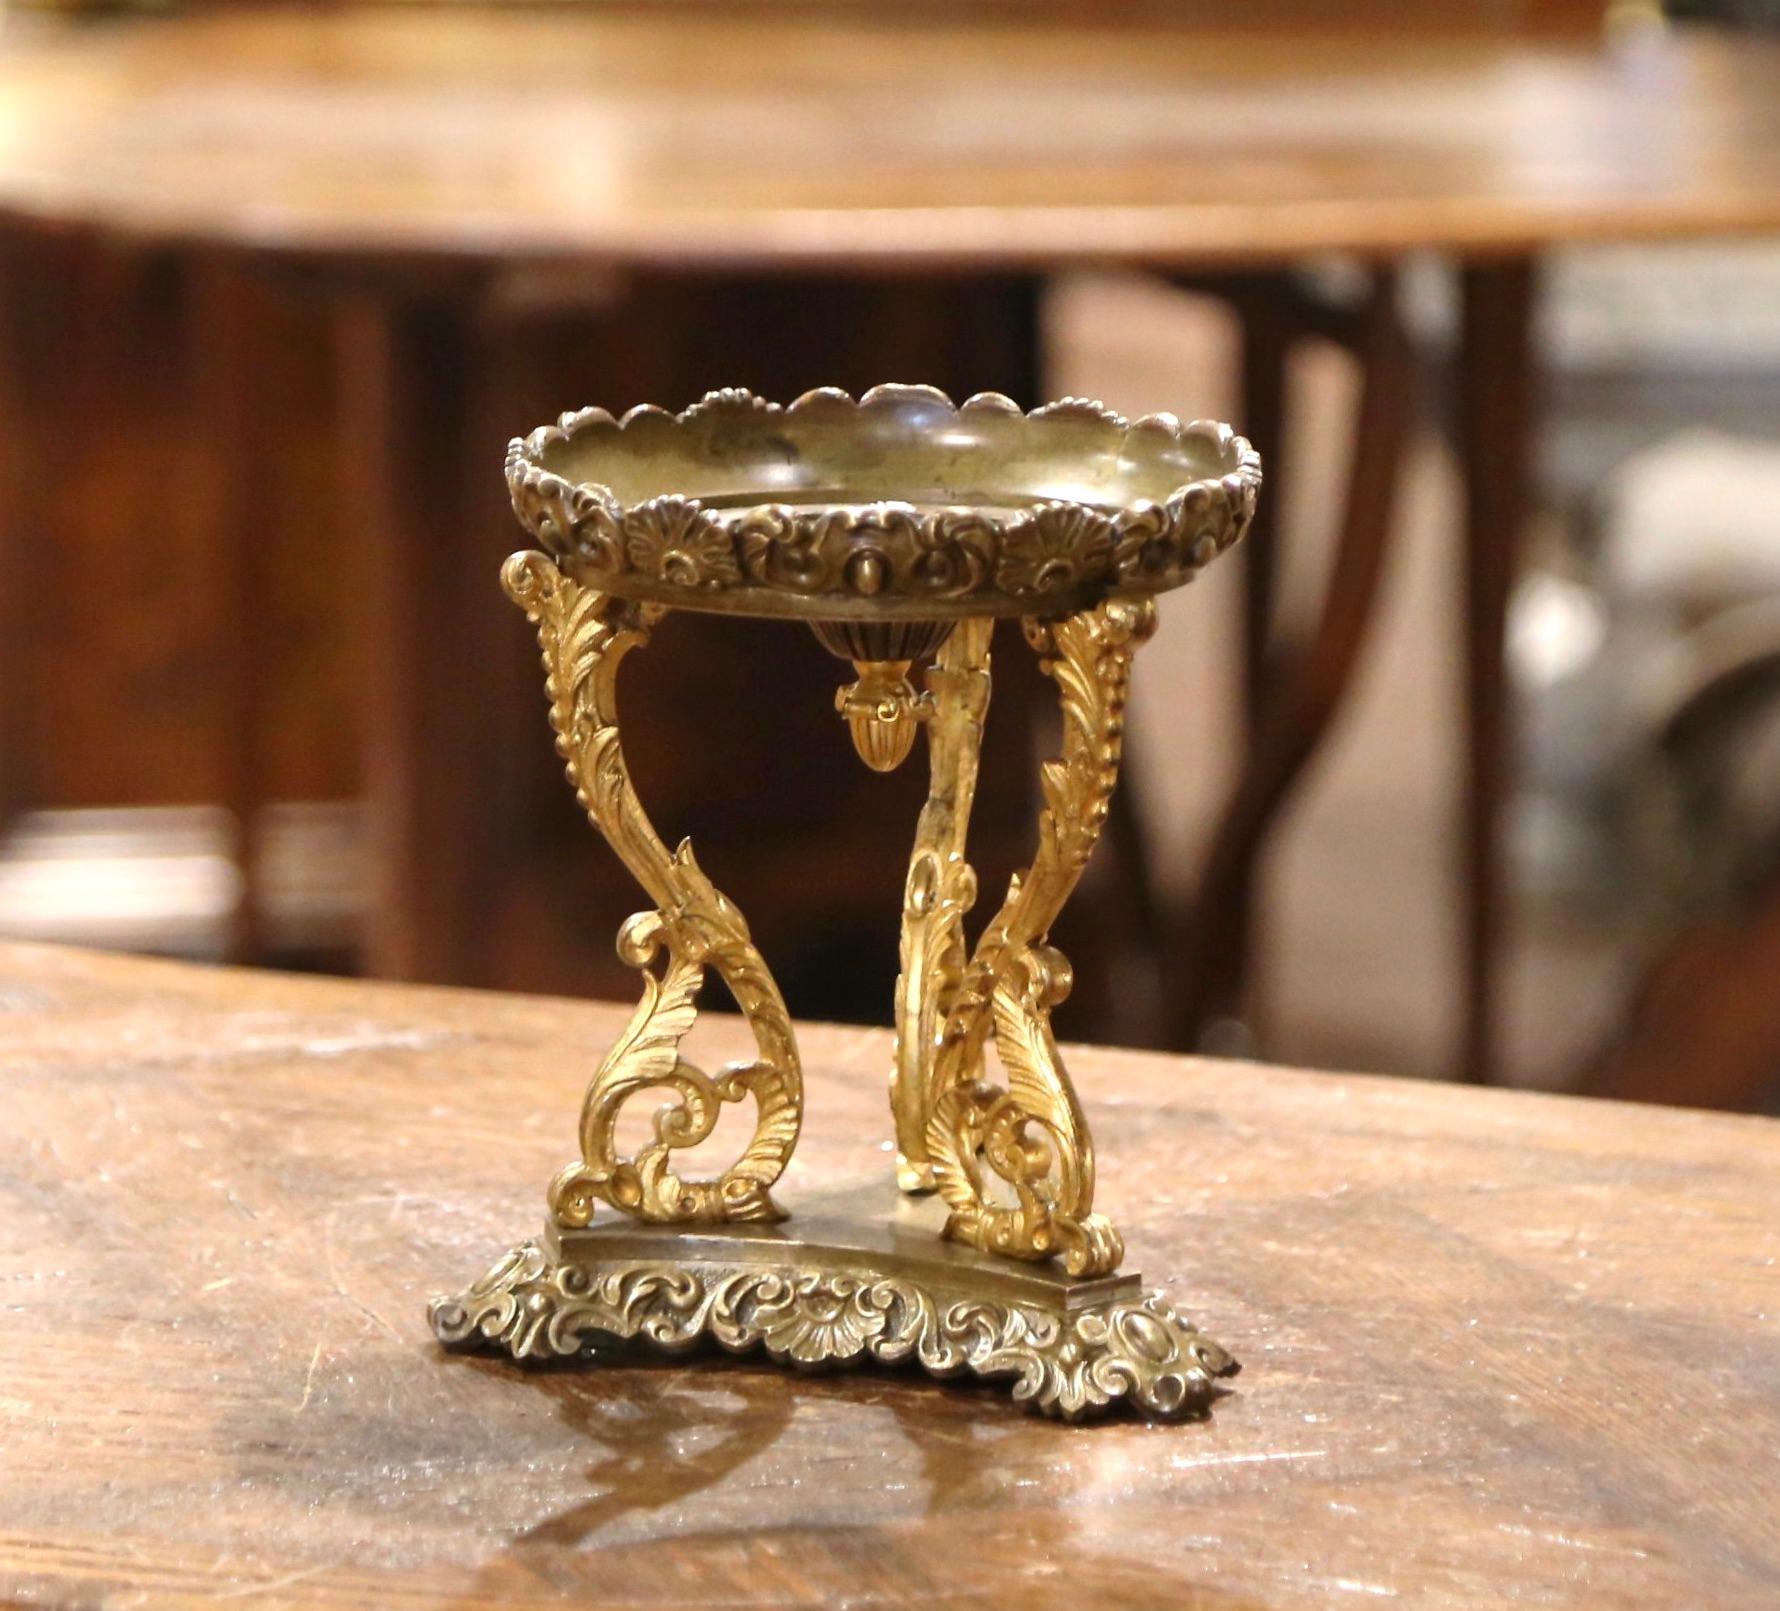 This elegant vintage candleholder was crafted in France, circa 1950. The simple classic piece features a triangular bronze base attached to a circular shaped platform which will host a large pillar candle. The piece is in excellent condition and has